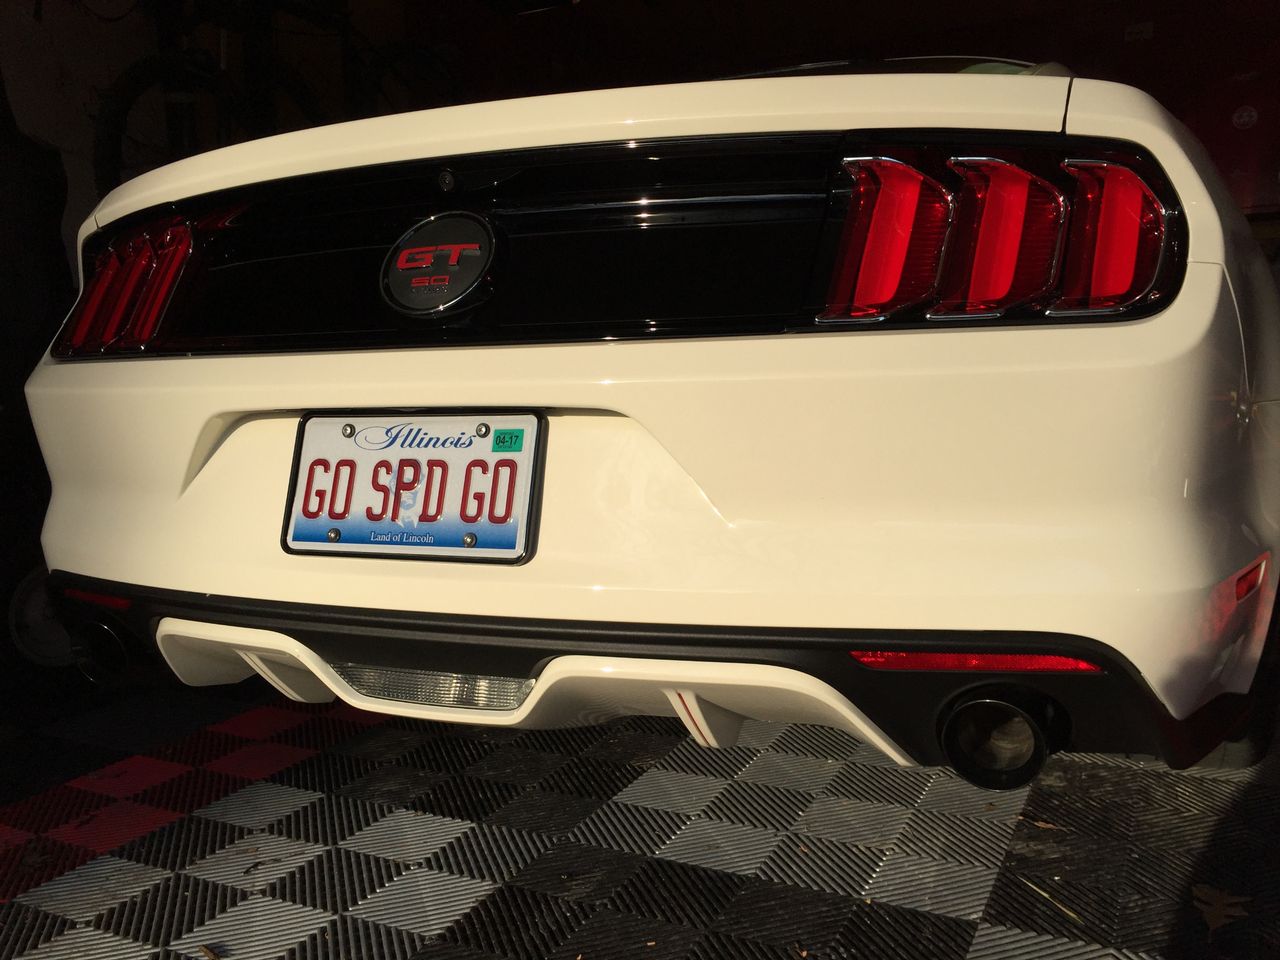 2015 Ford Mustang GT 50 Years Limited Edition | Park Ridge, IL, Wimbledon White Metallic (White), Rear Wheel